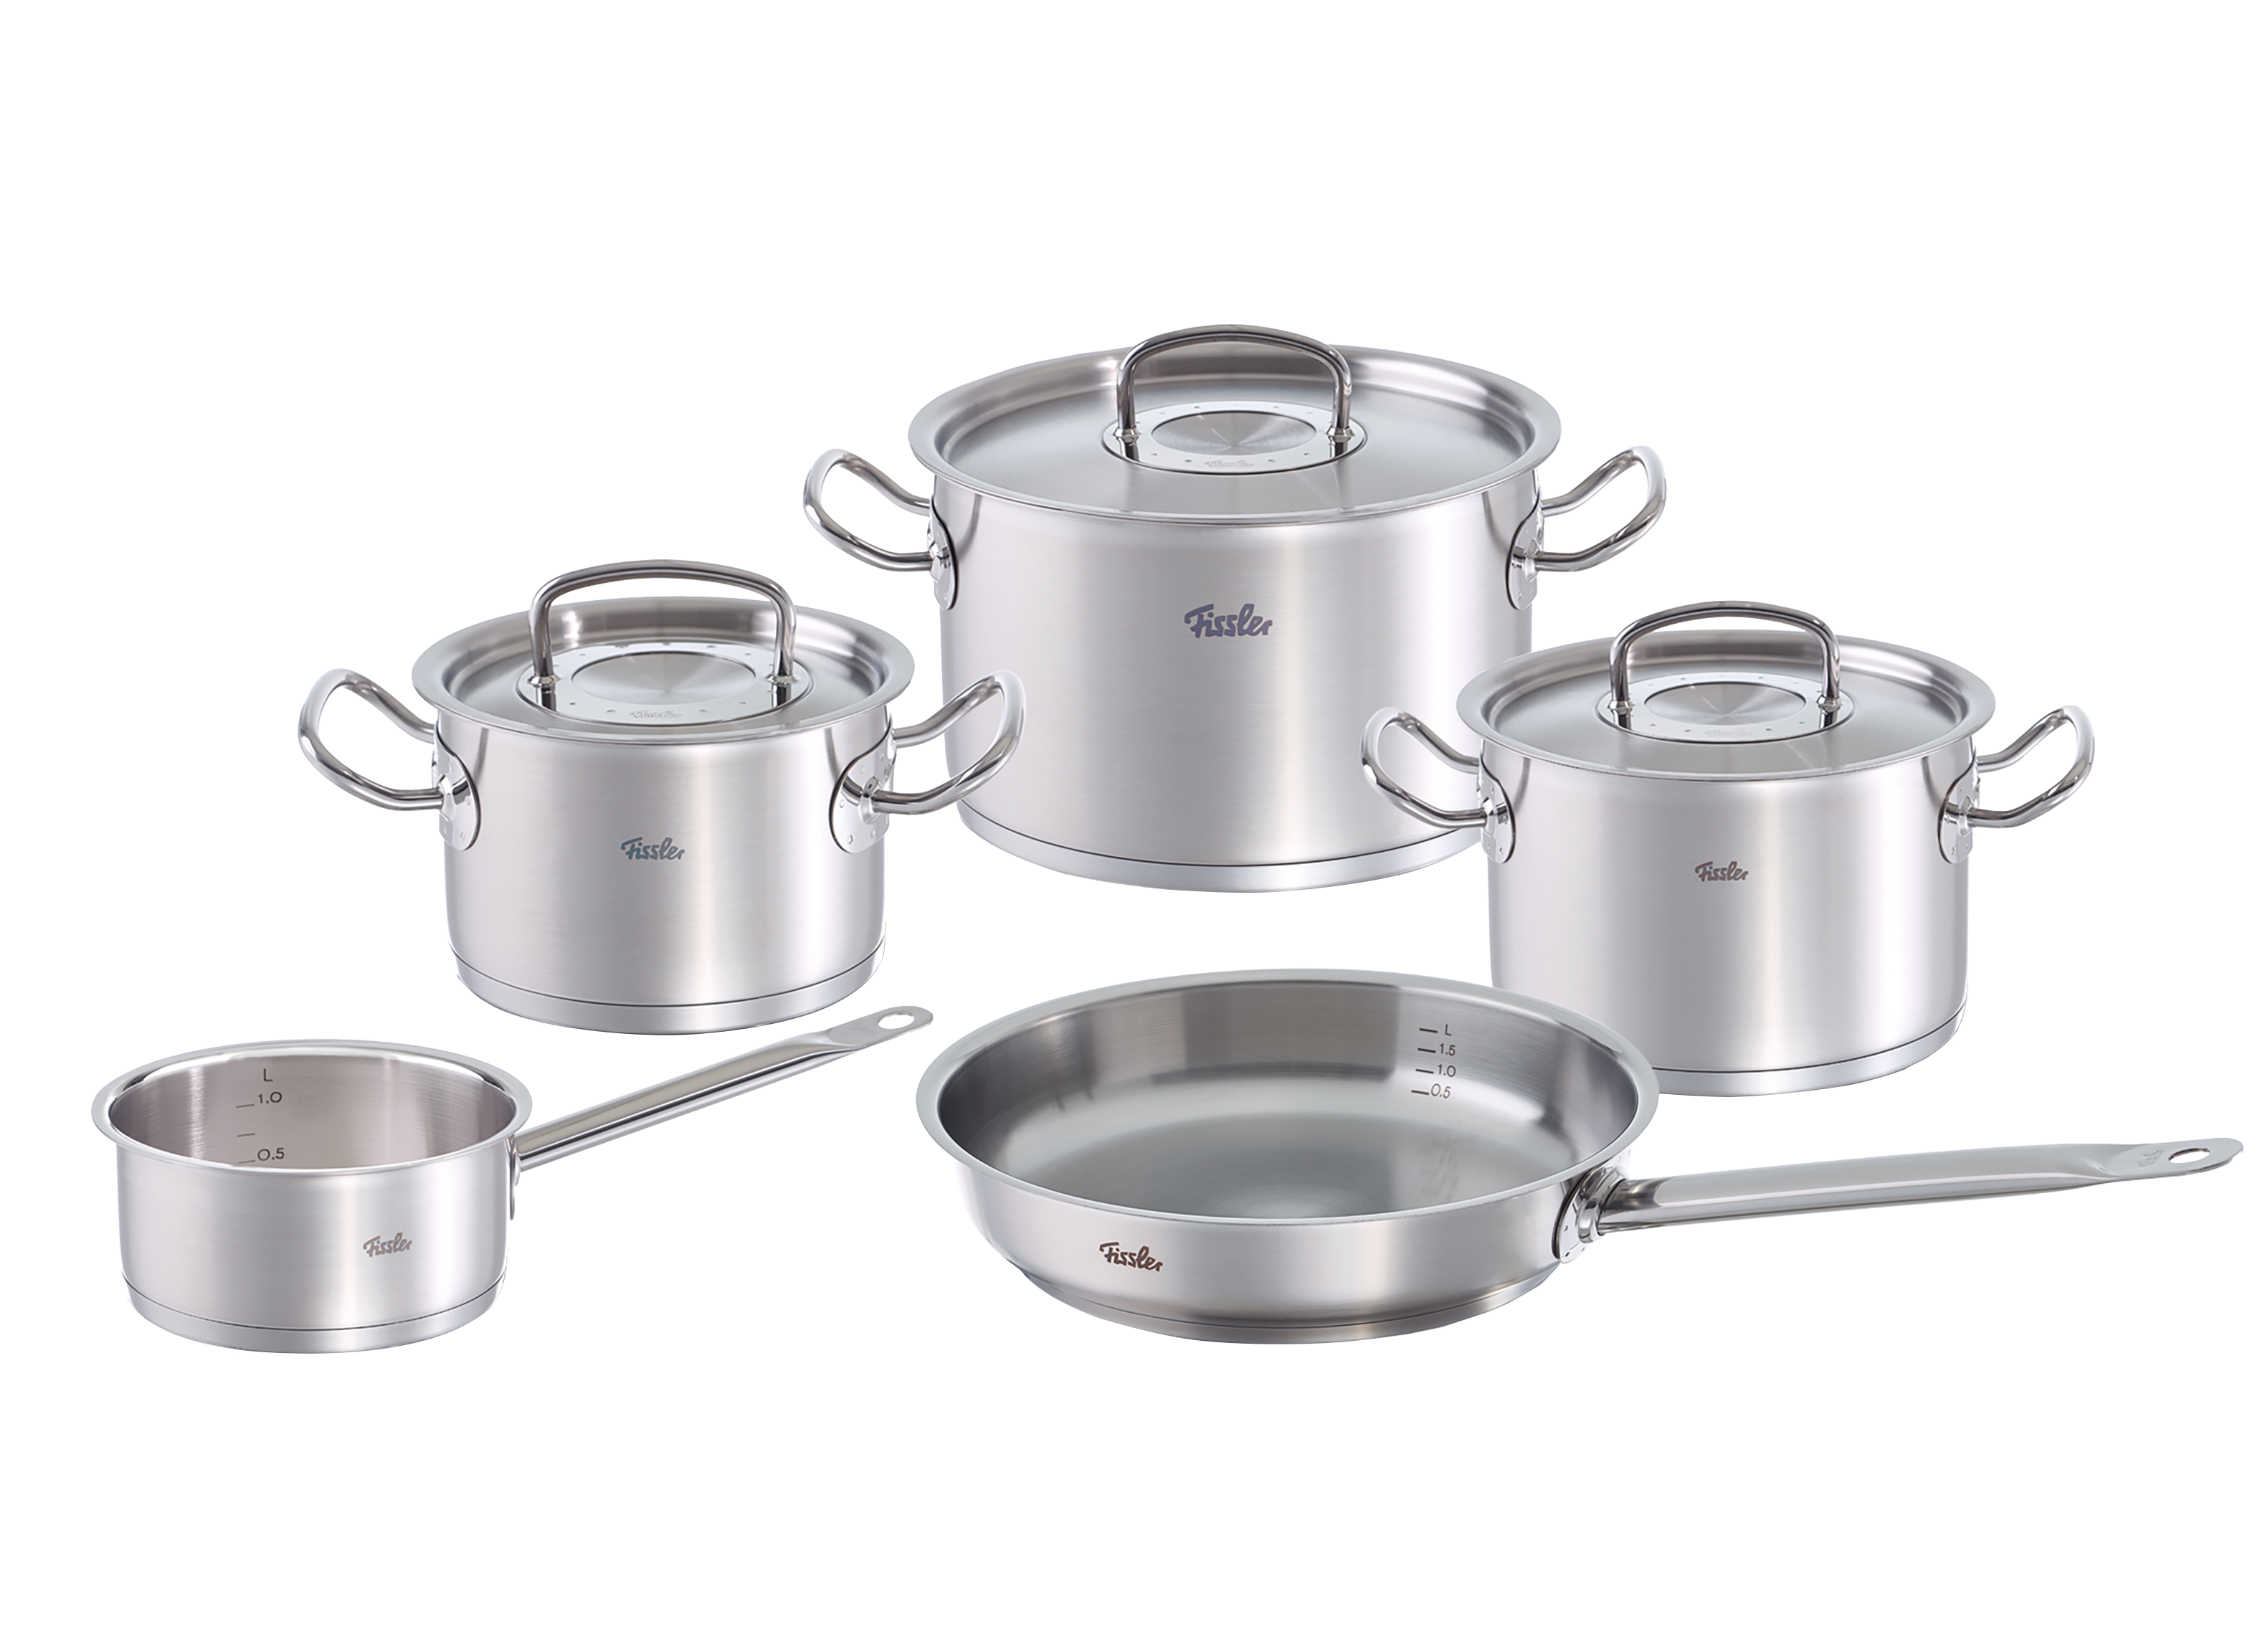 Fissler Original-Profi Collection Stainless Steel Cookware Review -  Consumer Reports